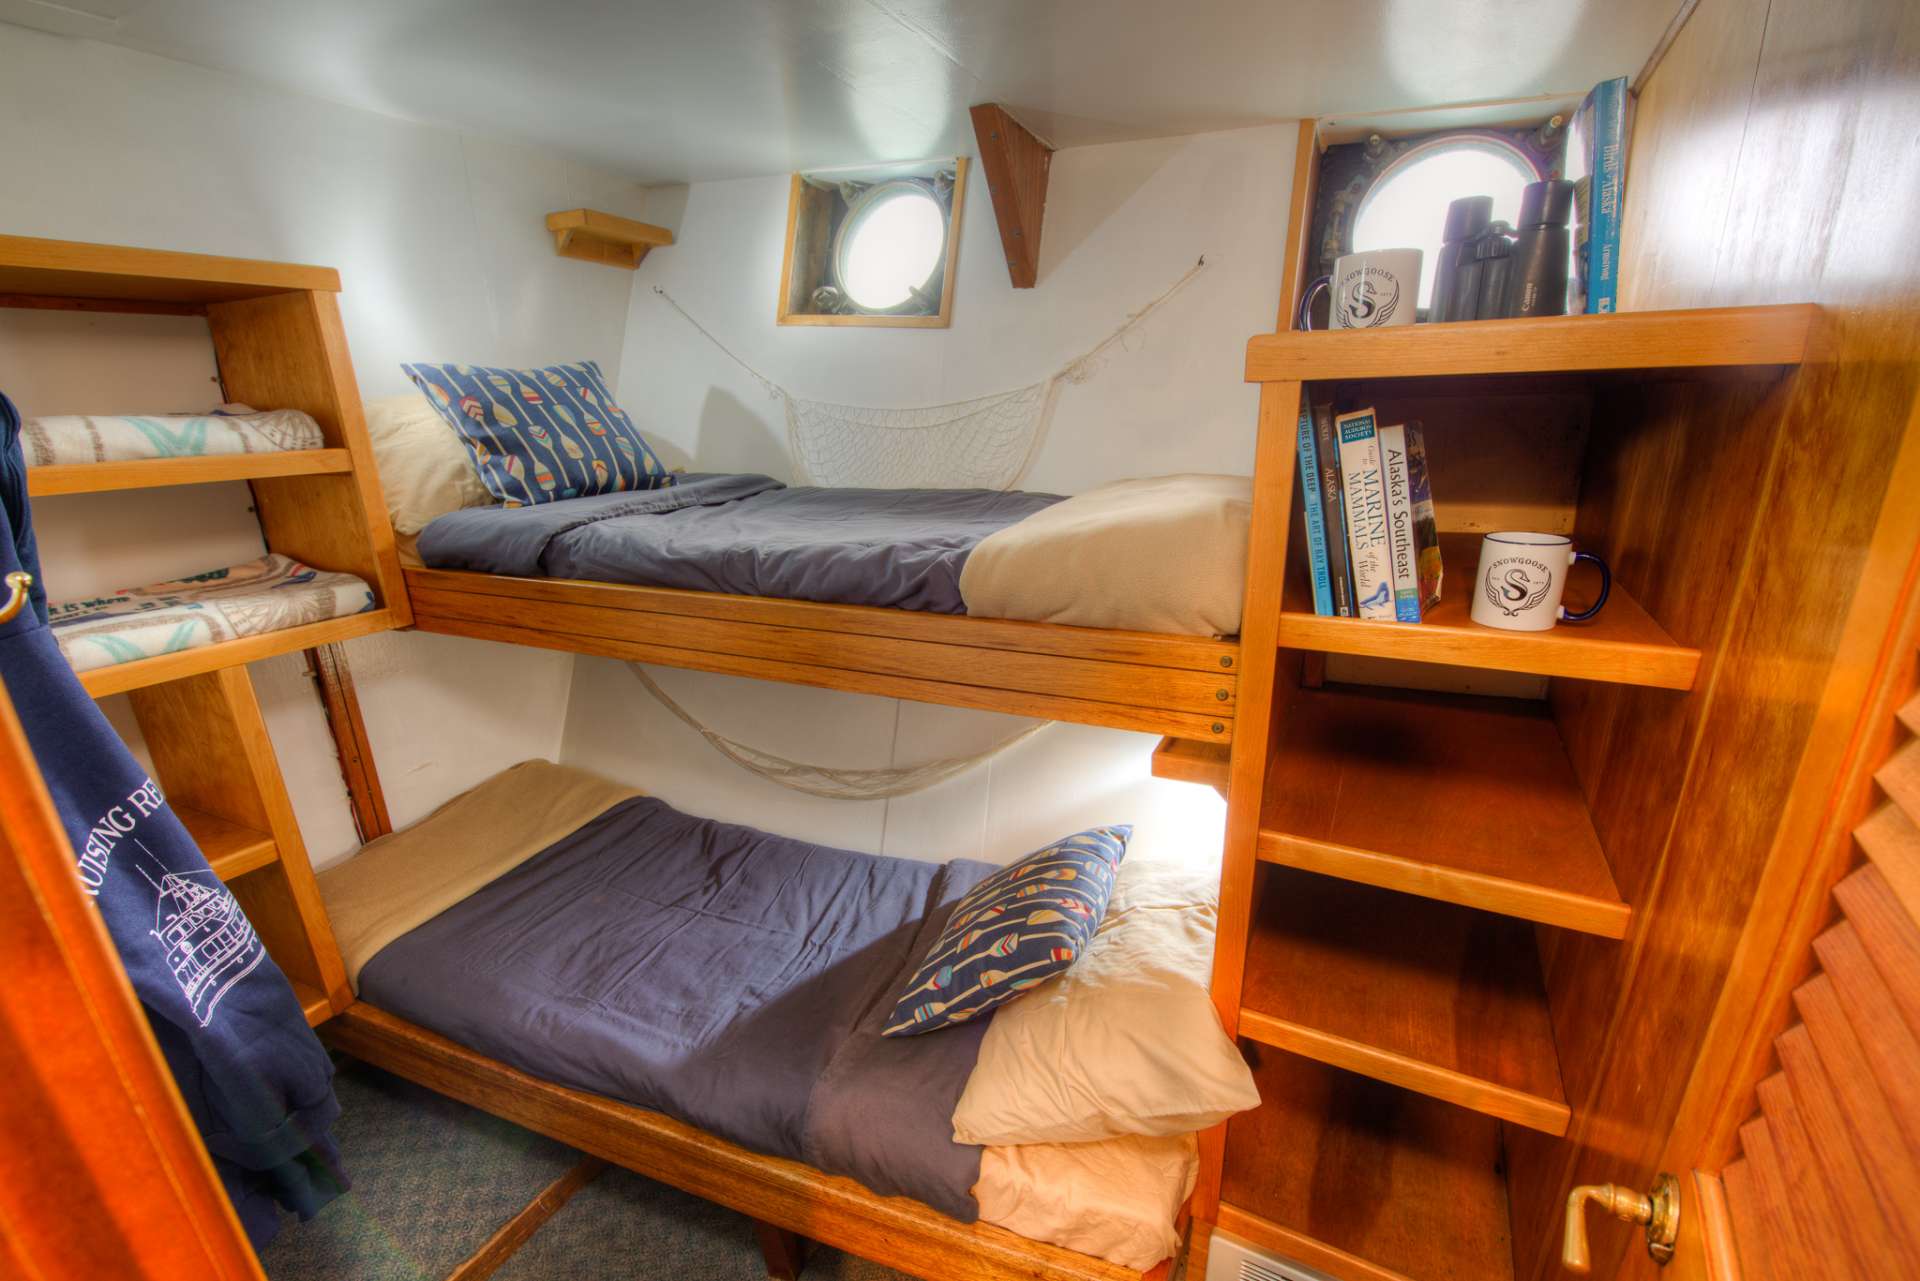 1 of 6 cozy cabins. Each cabin offers a memory foam mattress, and individual outlets.